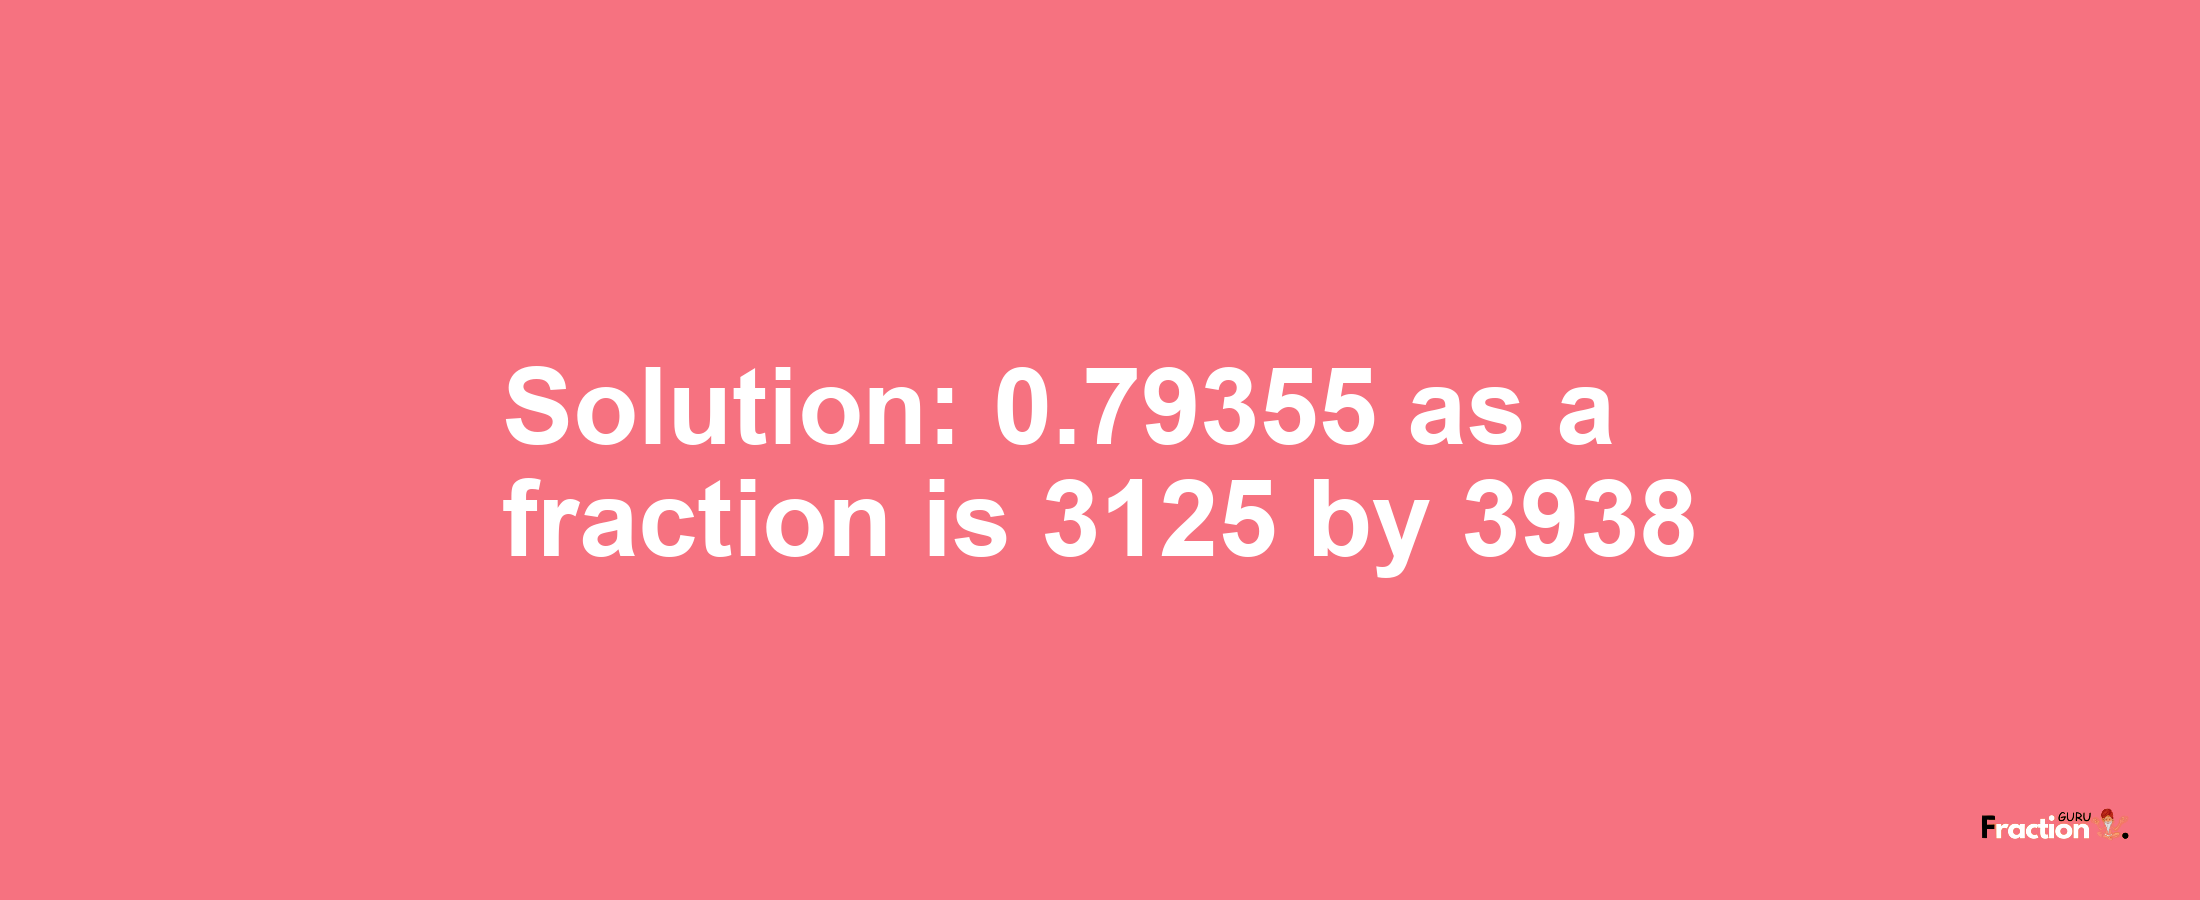 Solution:0.79355 as a fraction is 3125/3938